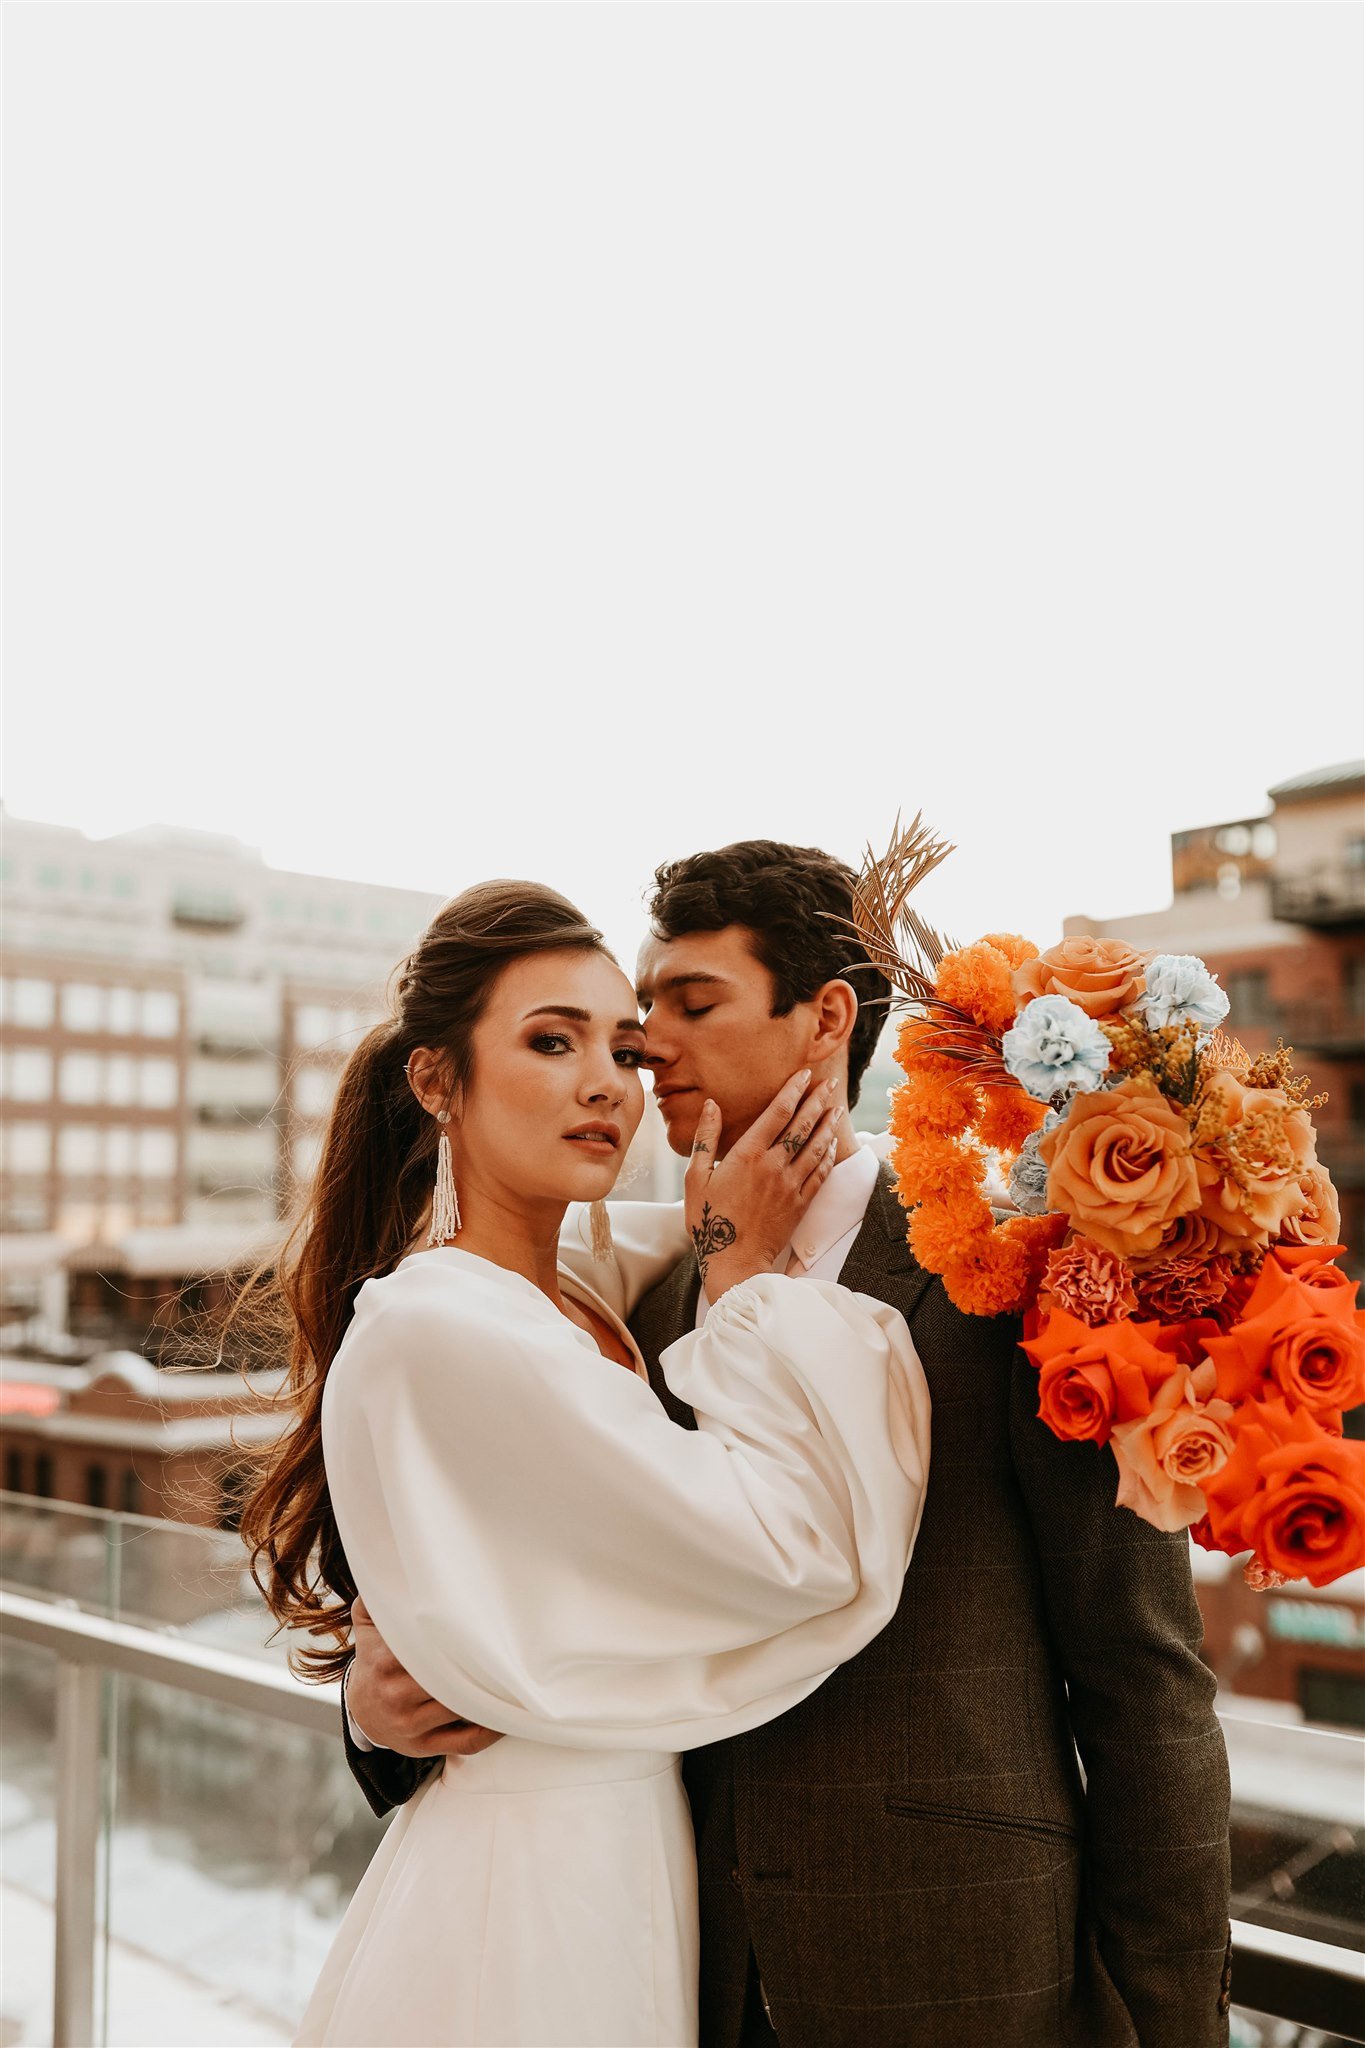 sorvete wedding dress by willowby is a long sleeve dress with a chic and modern style, perfect for this rooftop wedding in denver, colorado.